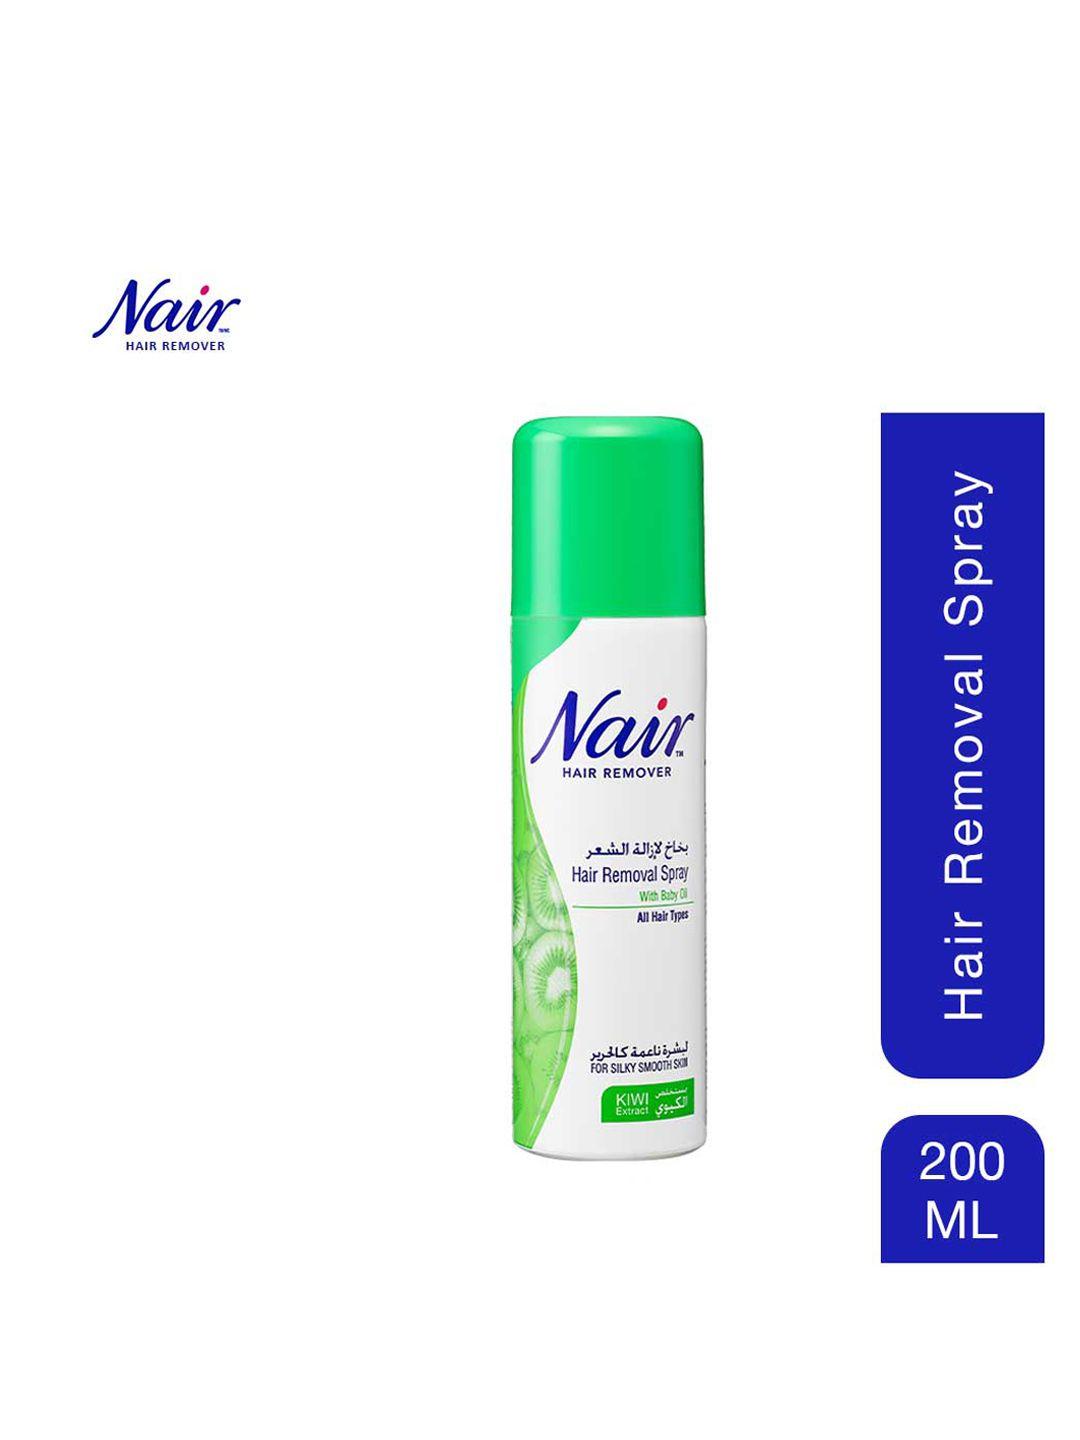 nair kiwi extract hair removal spray with baby oil for silky smooth skin - 200 ml